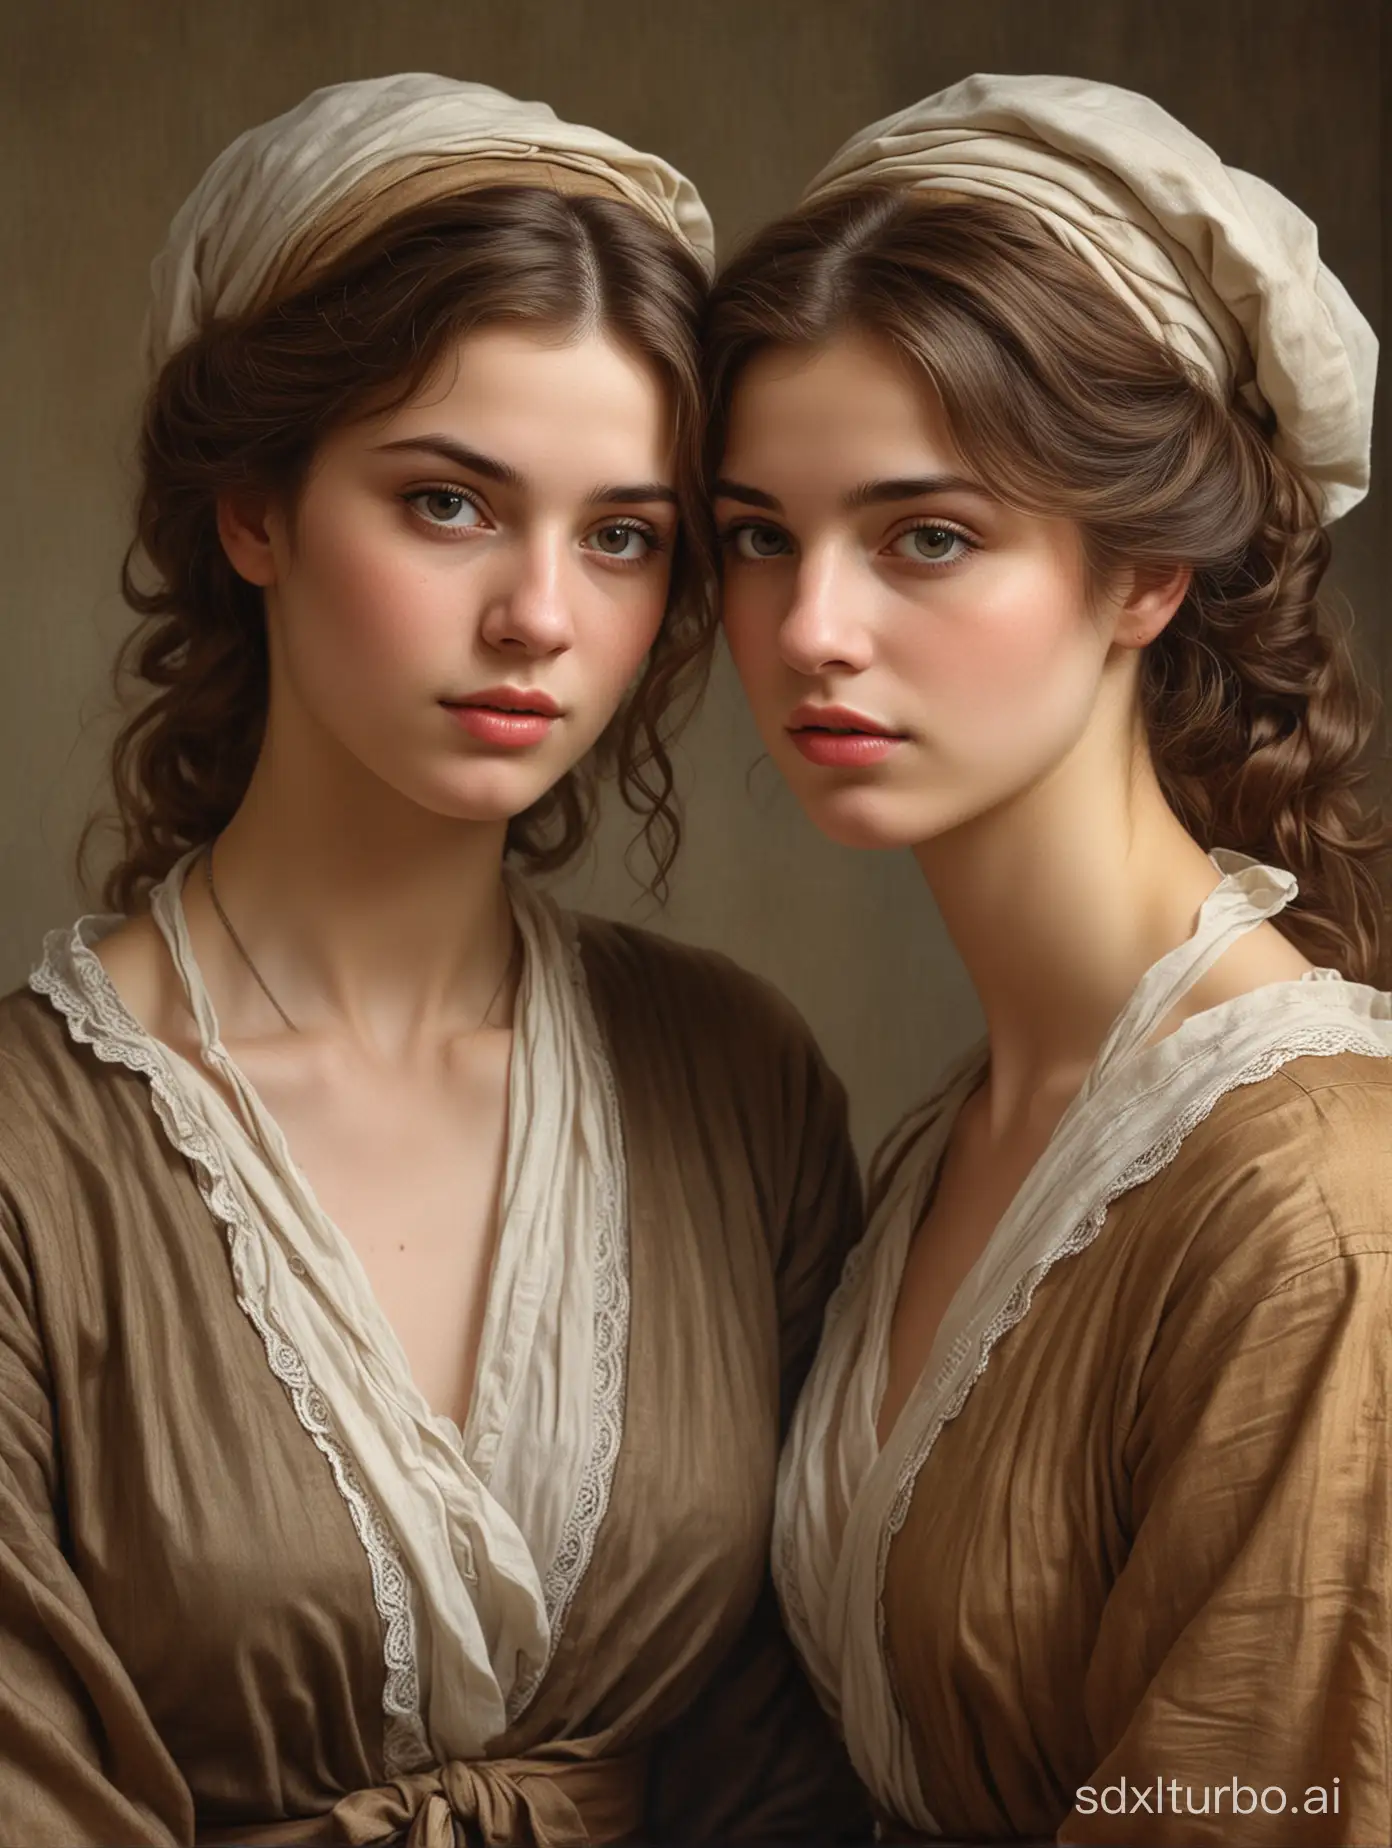 Draw twin women of antique appearance in realism style